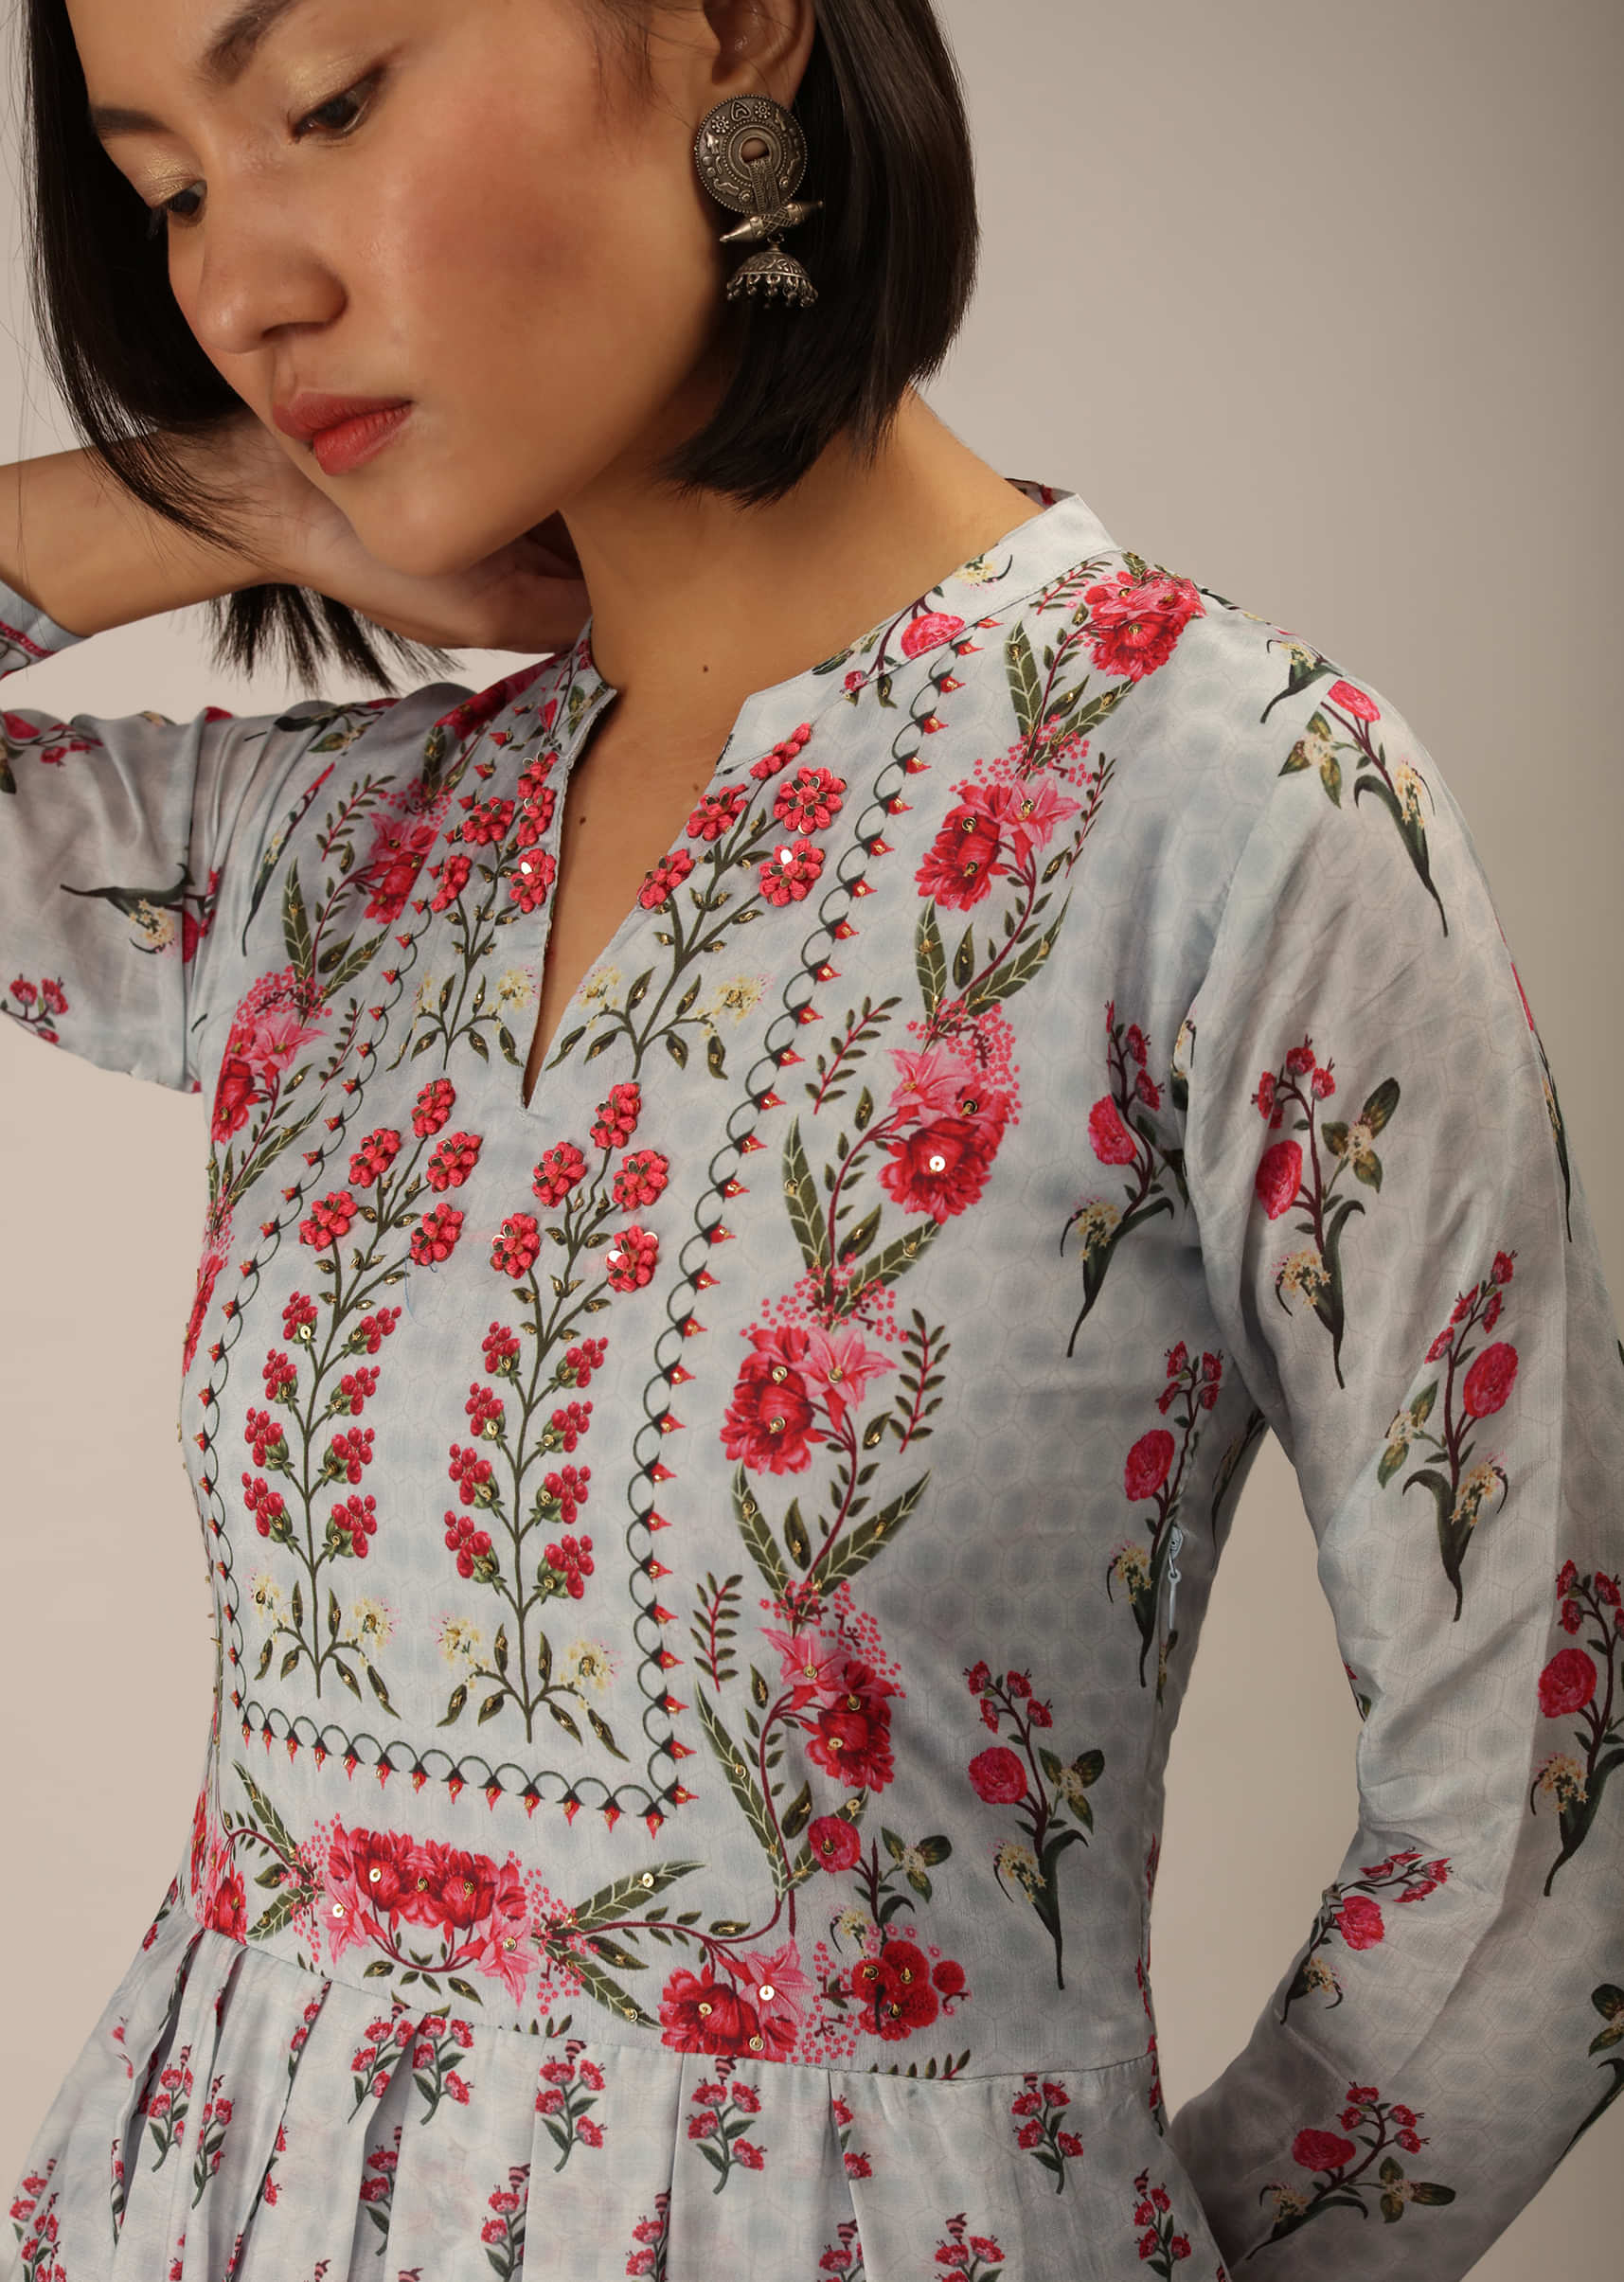 Powder Blue Cotton Crepe Tunic With Floral Print And French Knots On The Bodice